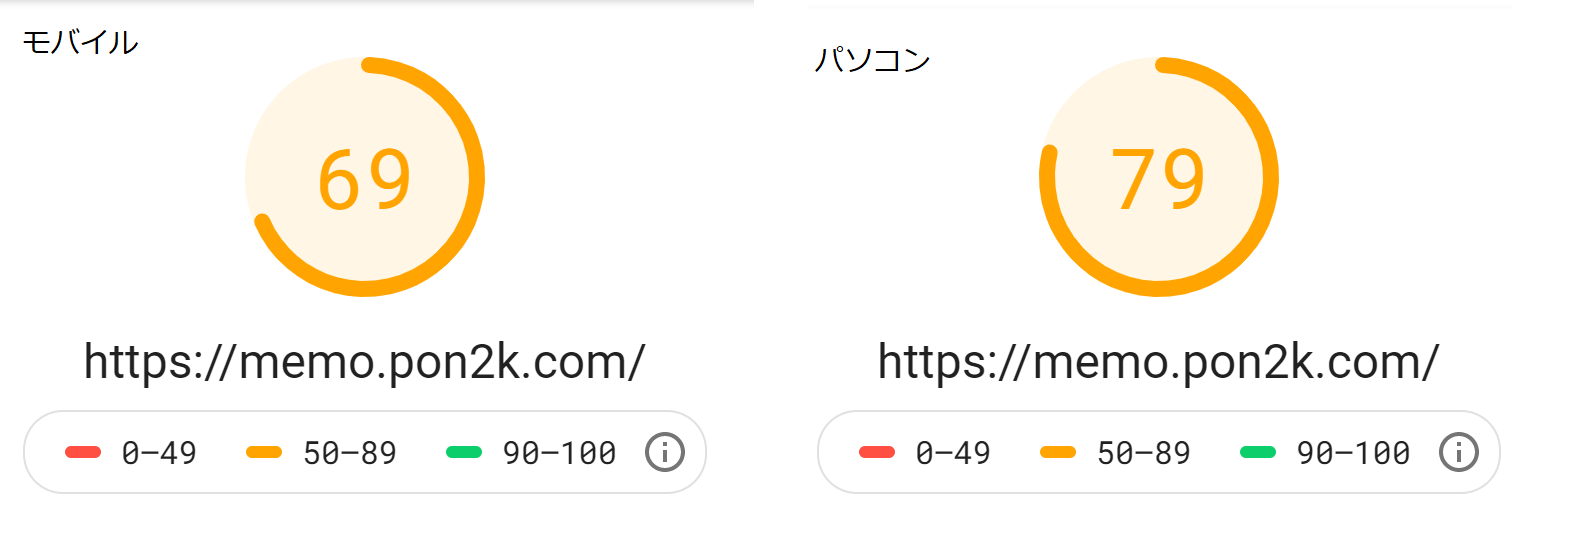 PageSpeed Insightsでサイトの表示速度計測